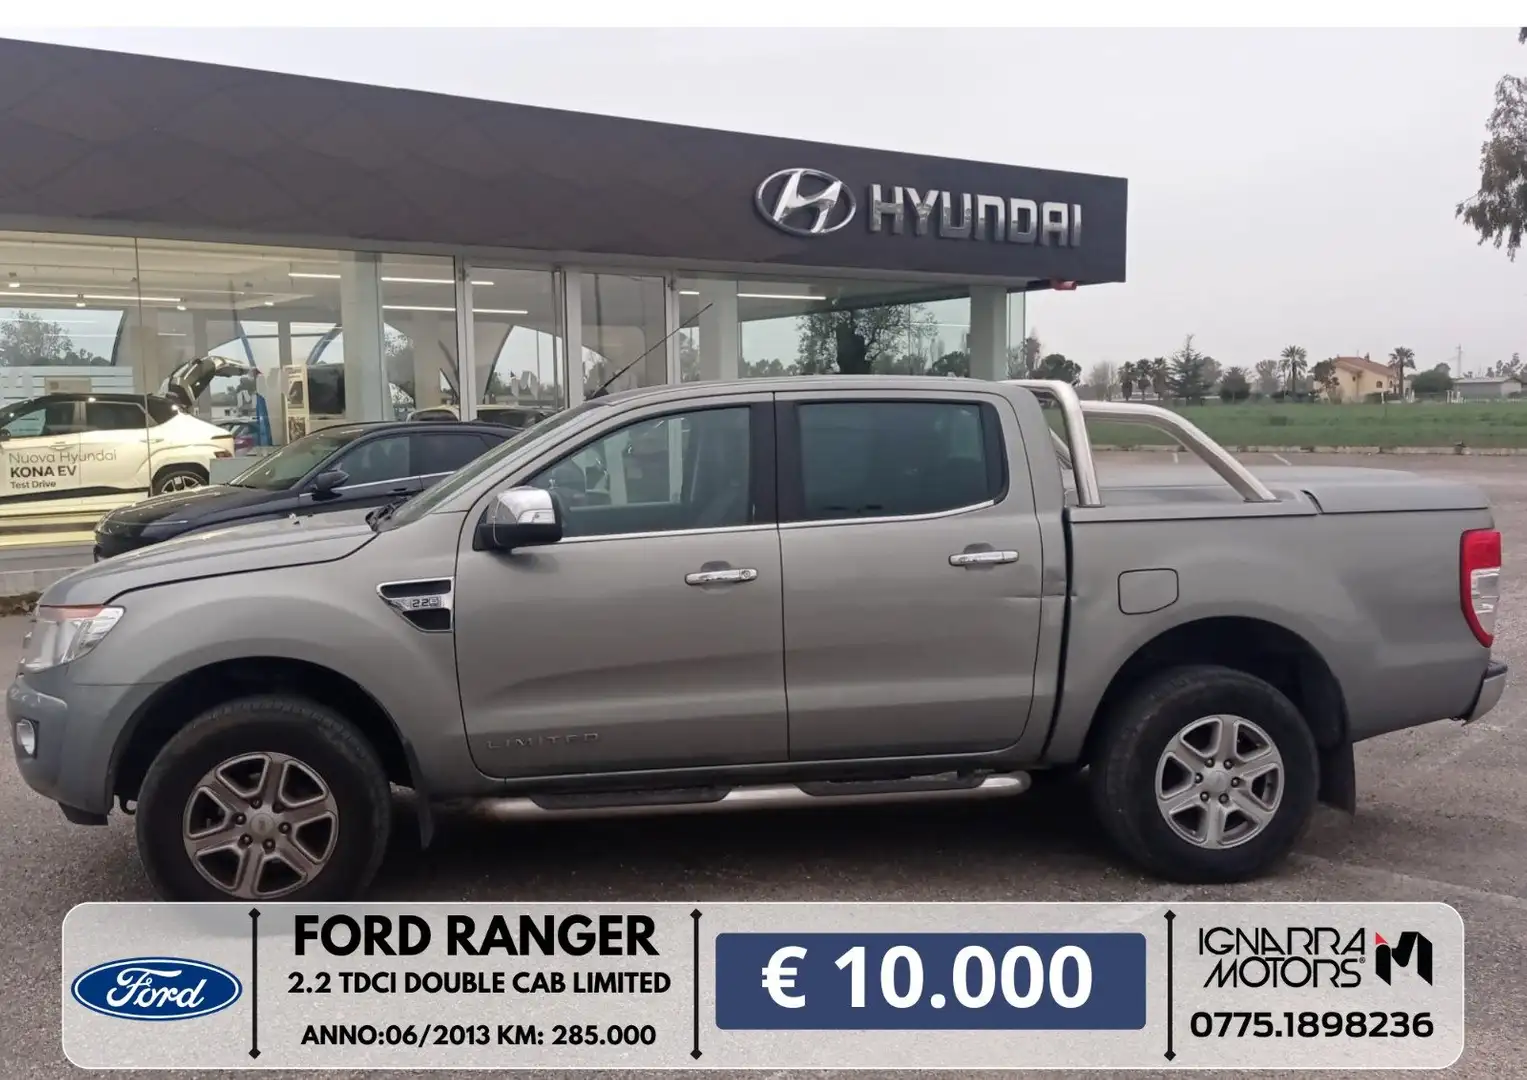 Ford Ranger Ranger 2.2 tdci double cab Limited ES256LD Grigio - 2